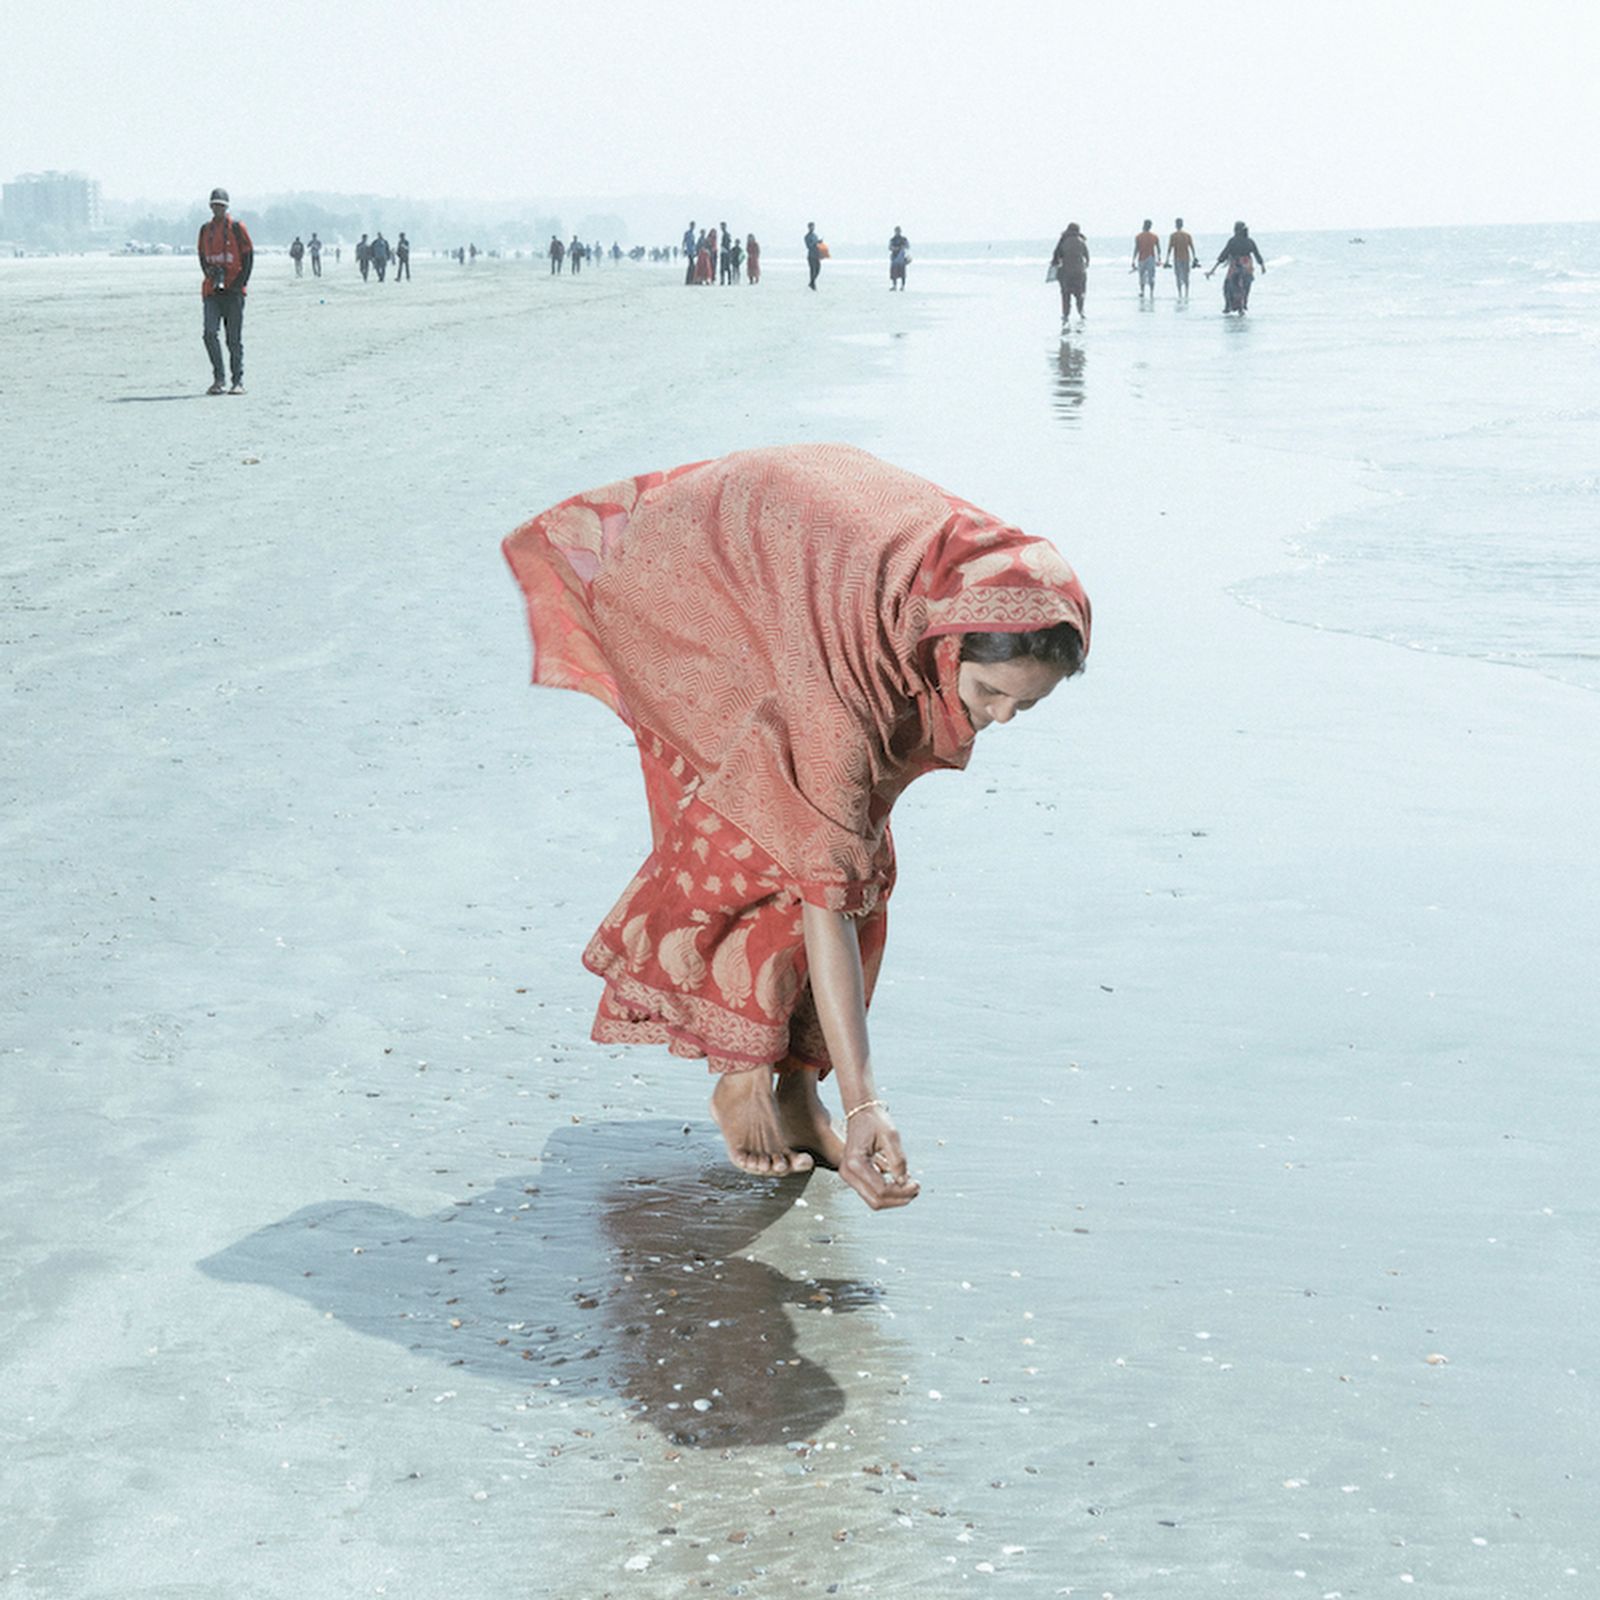 © Ismail Ferdous - Image from the Sea Beach photography project